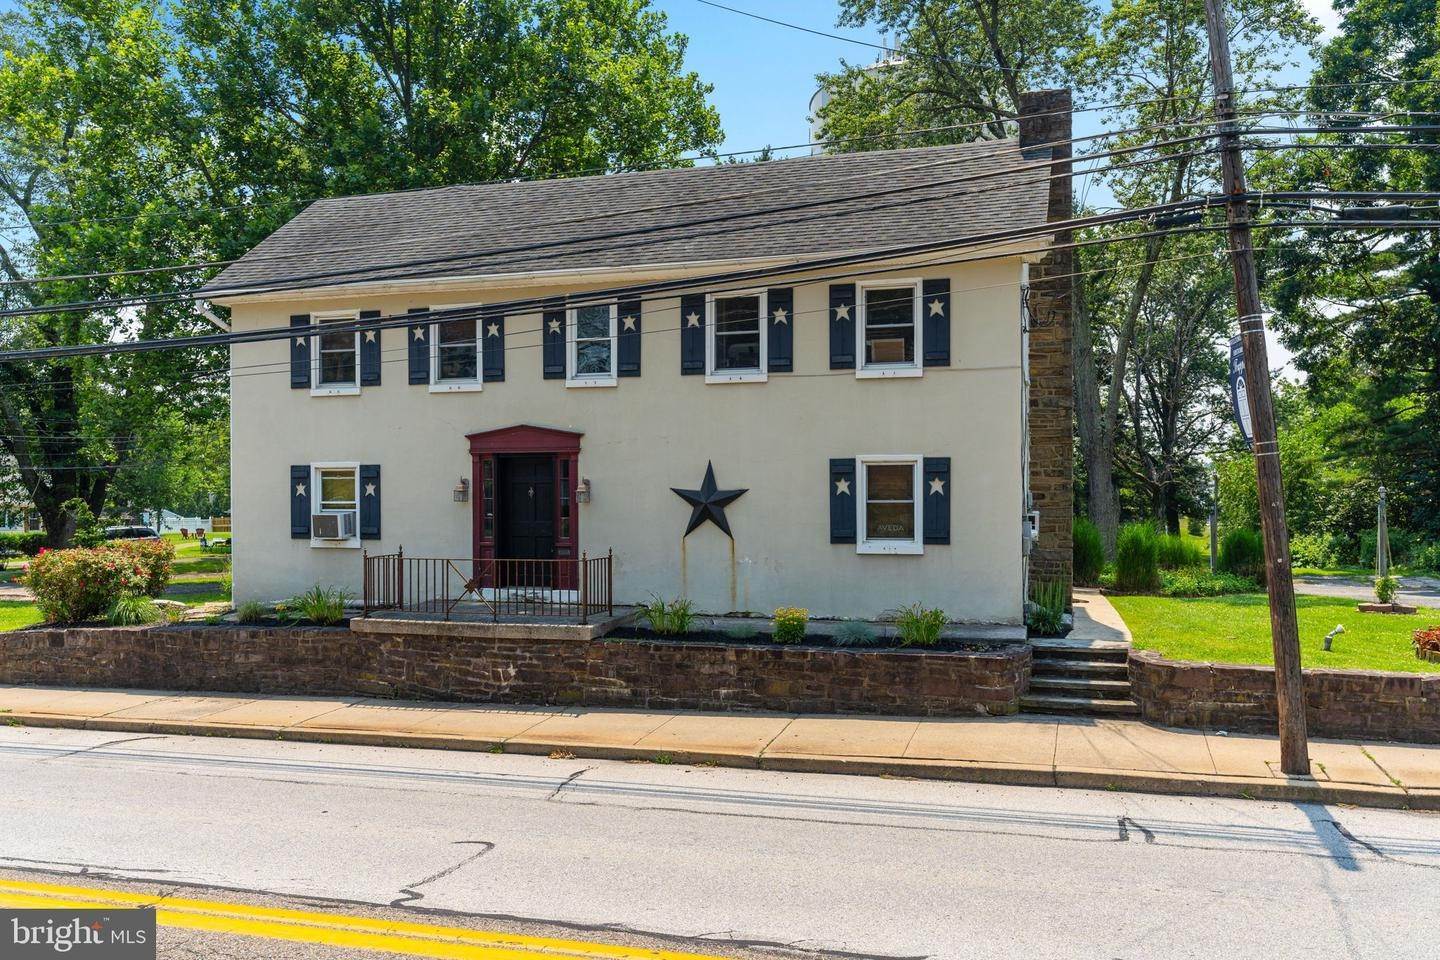 2. Commercial for Sale at 12 W MAIN Street Collegeville, Pennsylvania 19426 United States